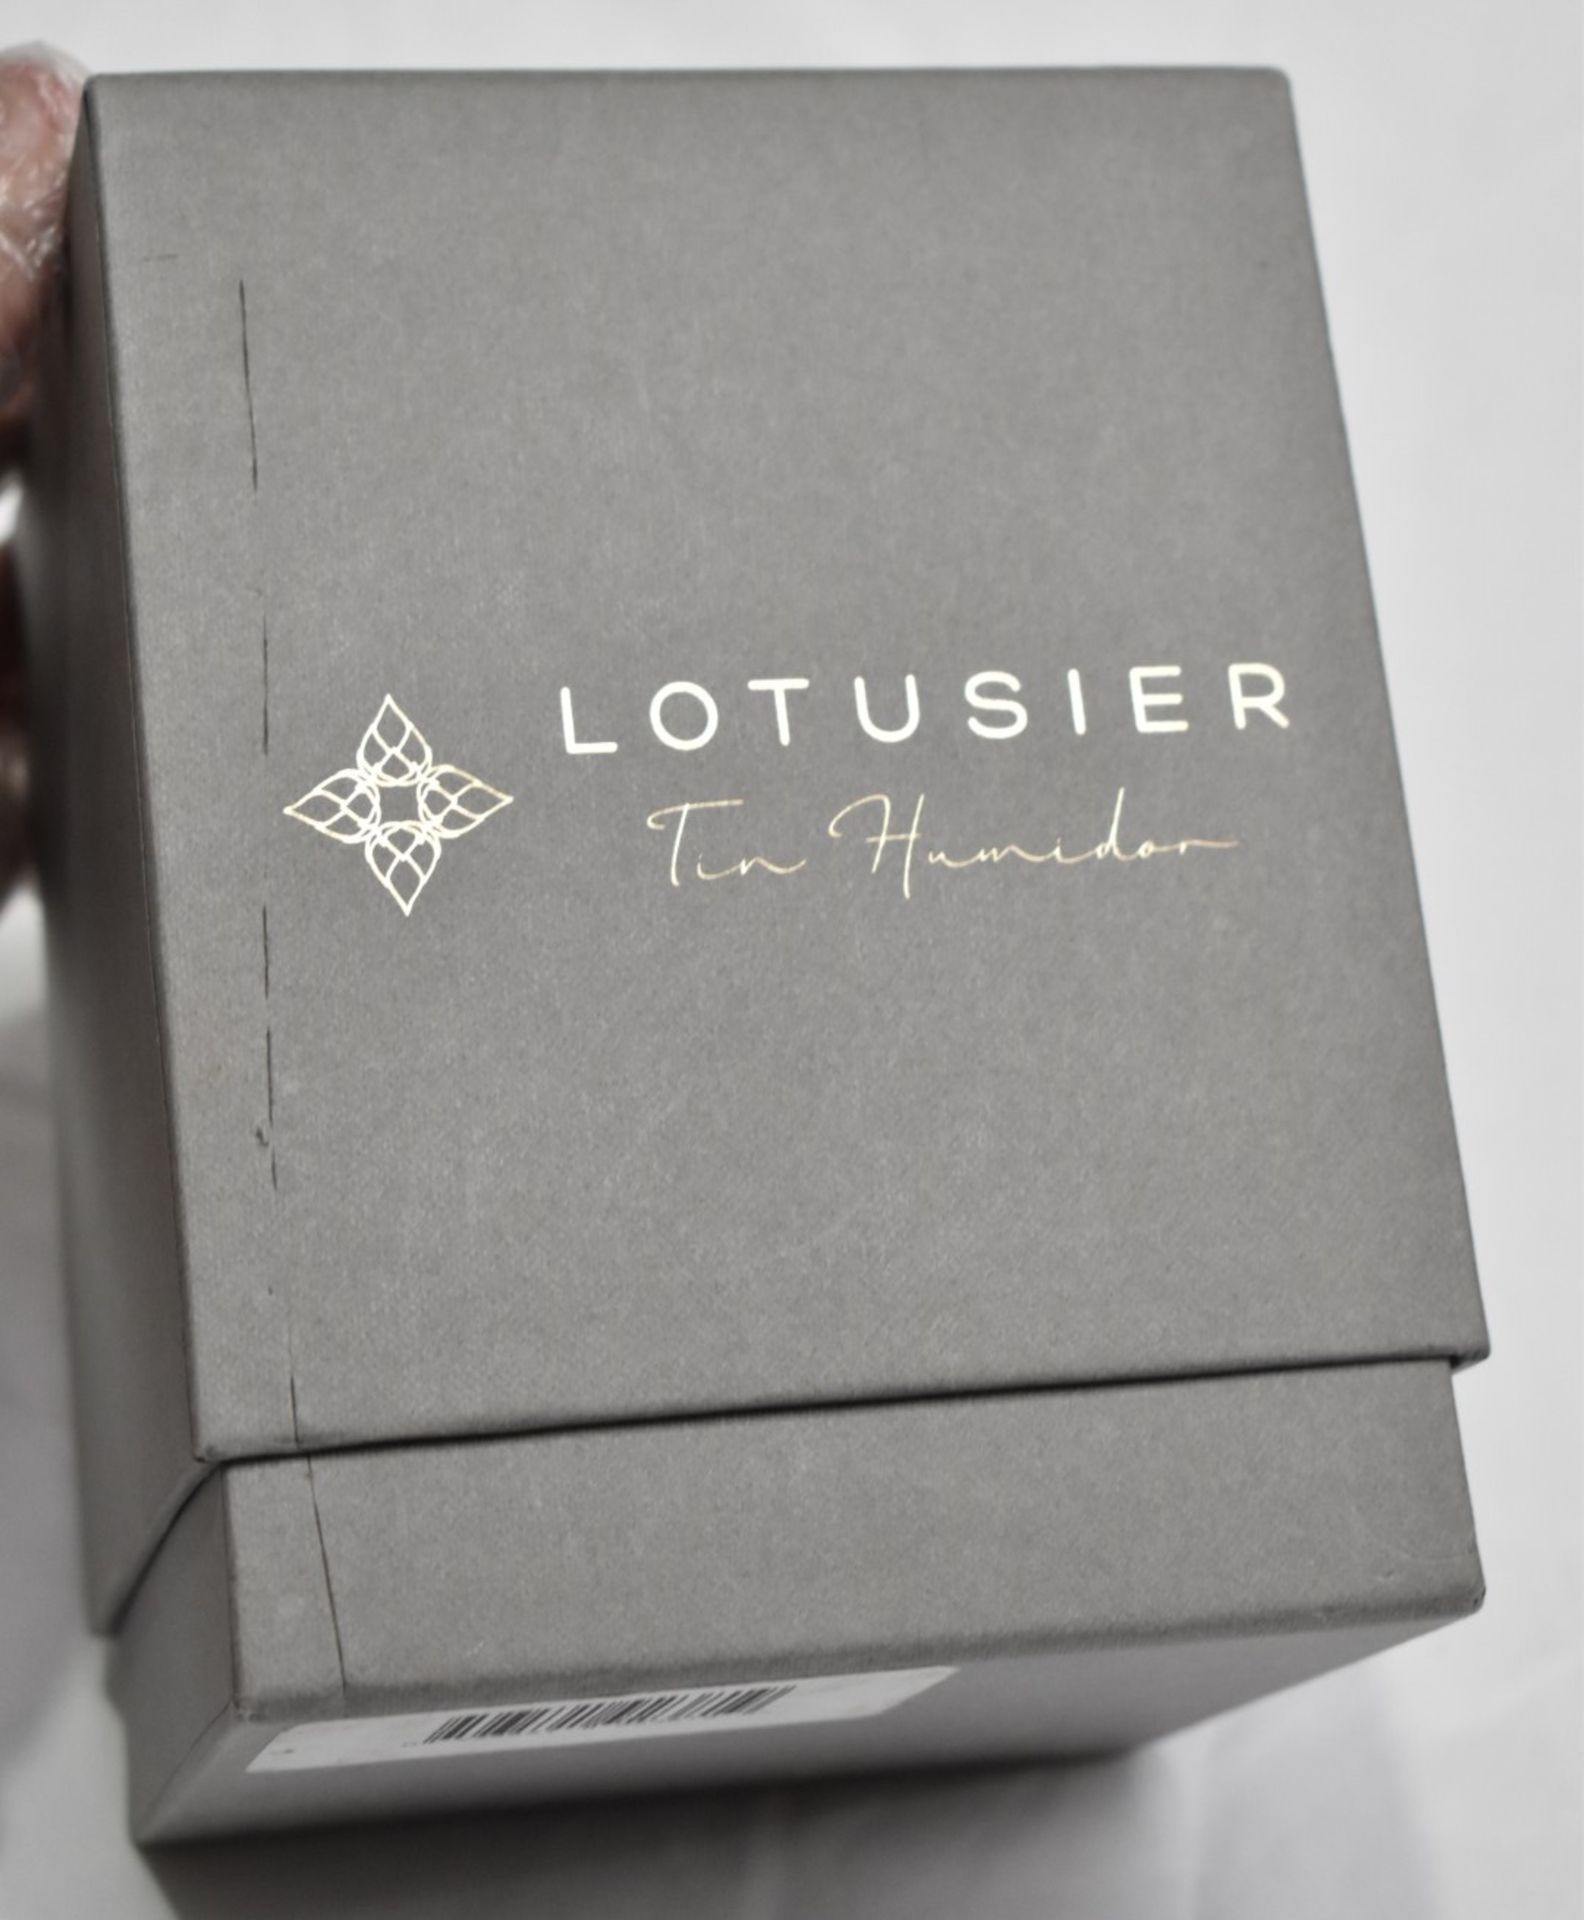 1 x LOTUSIER 'Tin Humidor' Luxury Double-walled Storage Tin In Grey - Original Price £130.00 - Image 9 of 9